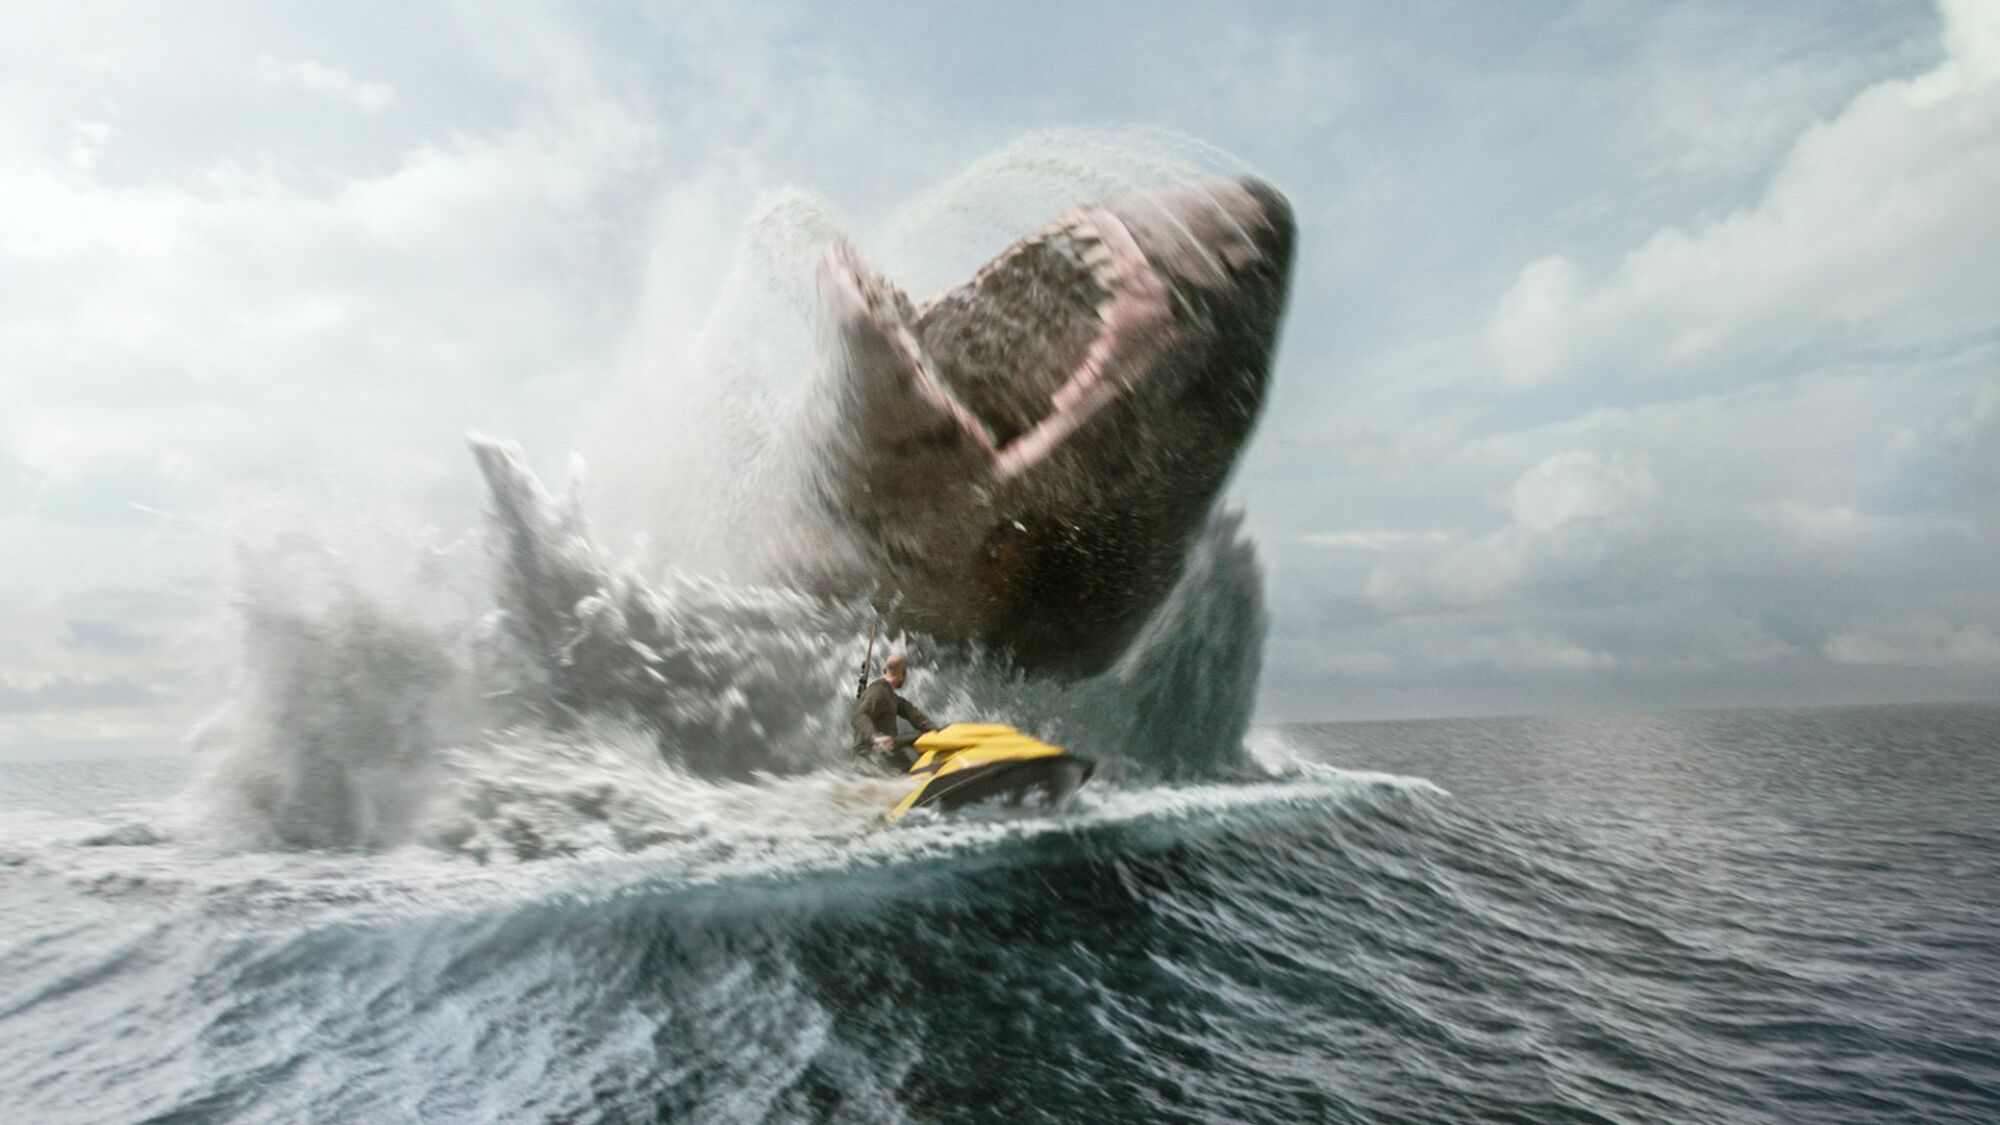 Jason Statham races away from a megladon in "Meg 2: The Trench."